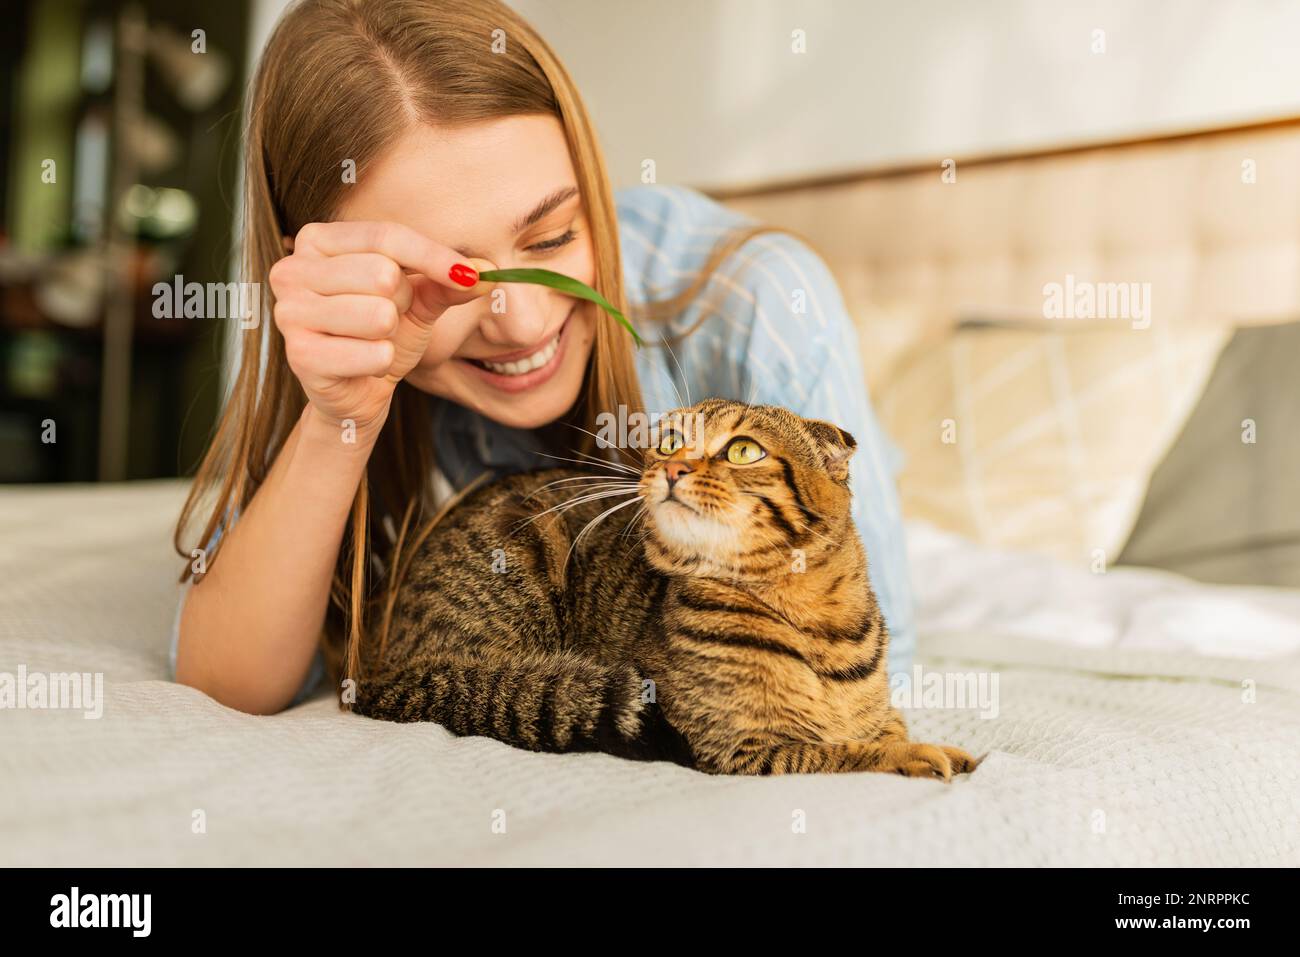 Smiling Young blonde woman lying in her bed in shirt a stroking a cute domestic playing scottish tabby cat at home, concept of loving and caring pets Stock Photo